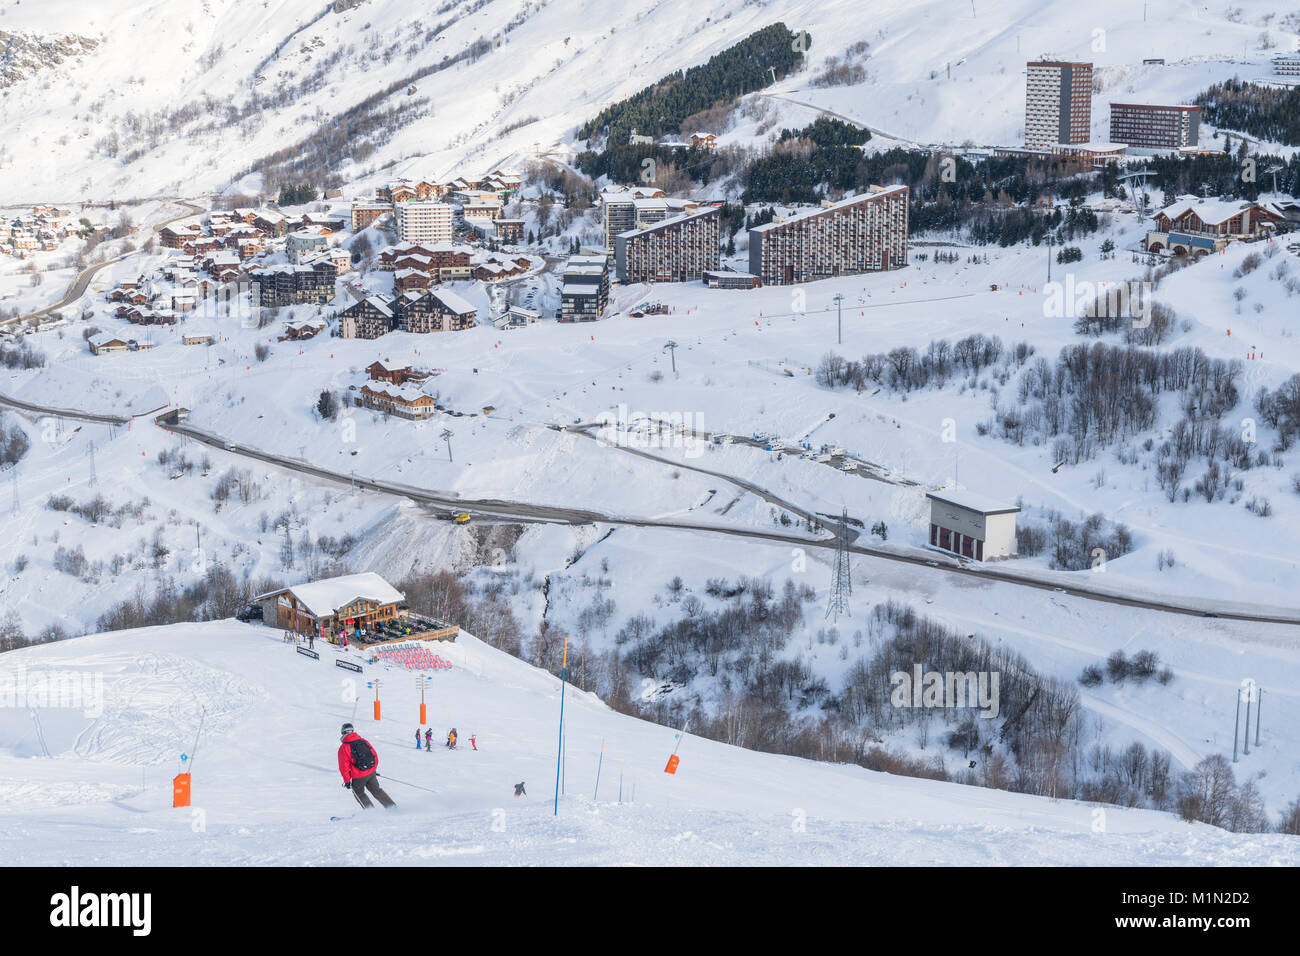 Skiing on La Masse in the Three Valleys ski area of France. Across the valley there is a view of the lower part of the Les Menuires ski resort. Stock Photo